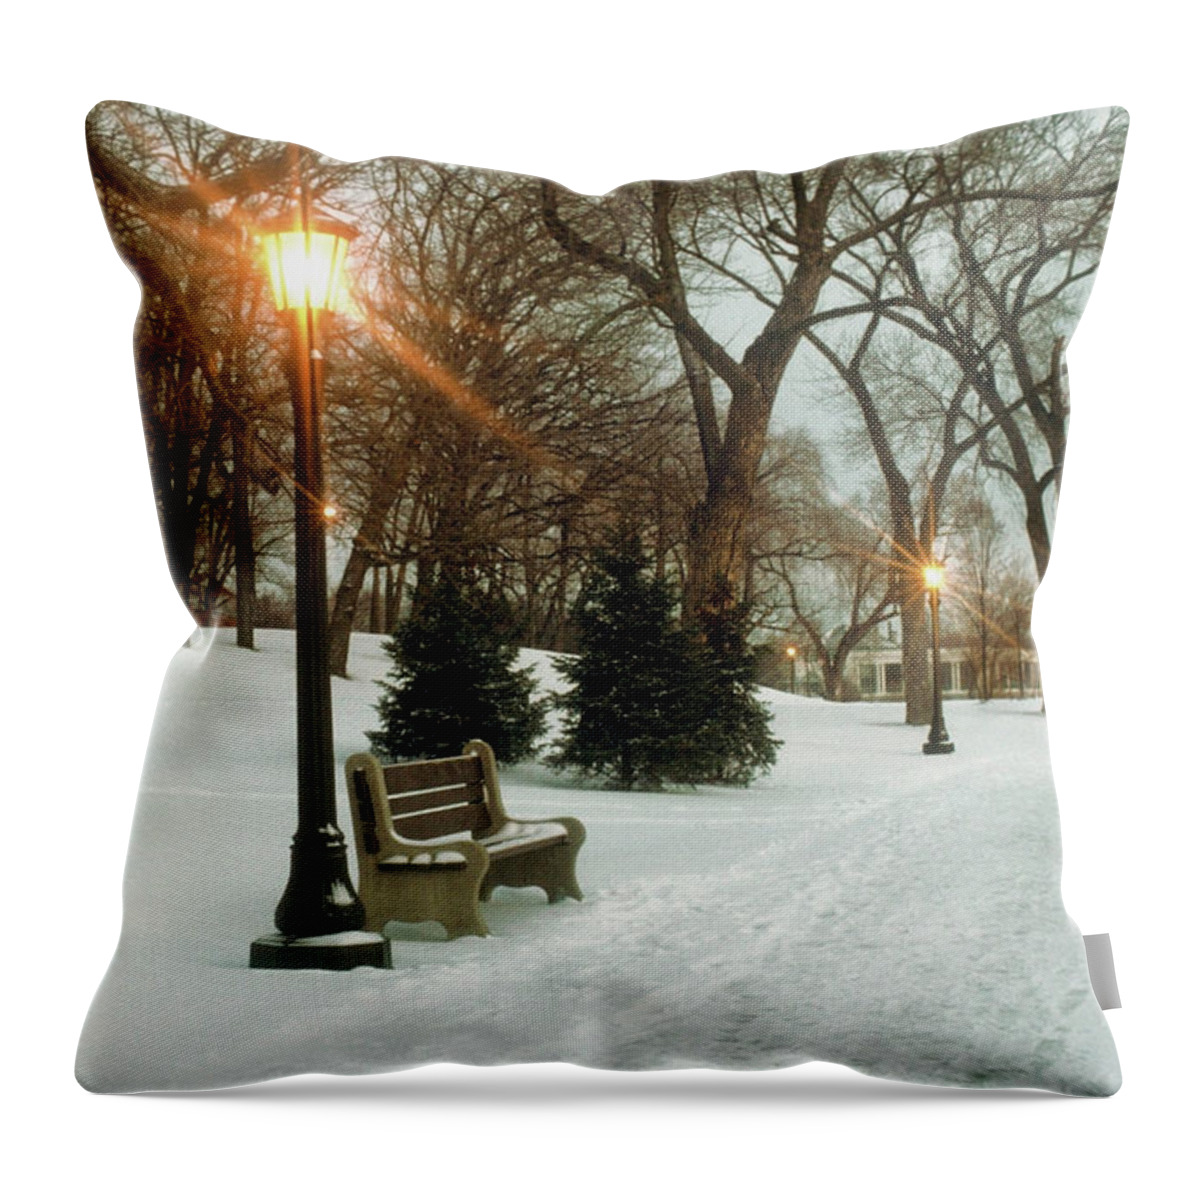 Snow Throw Pillow featuring the photograph Bench With Streetlamp Near Snow-covered by Medioimages/photodisc